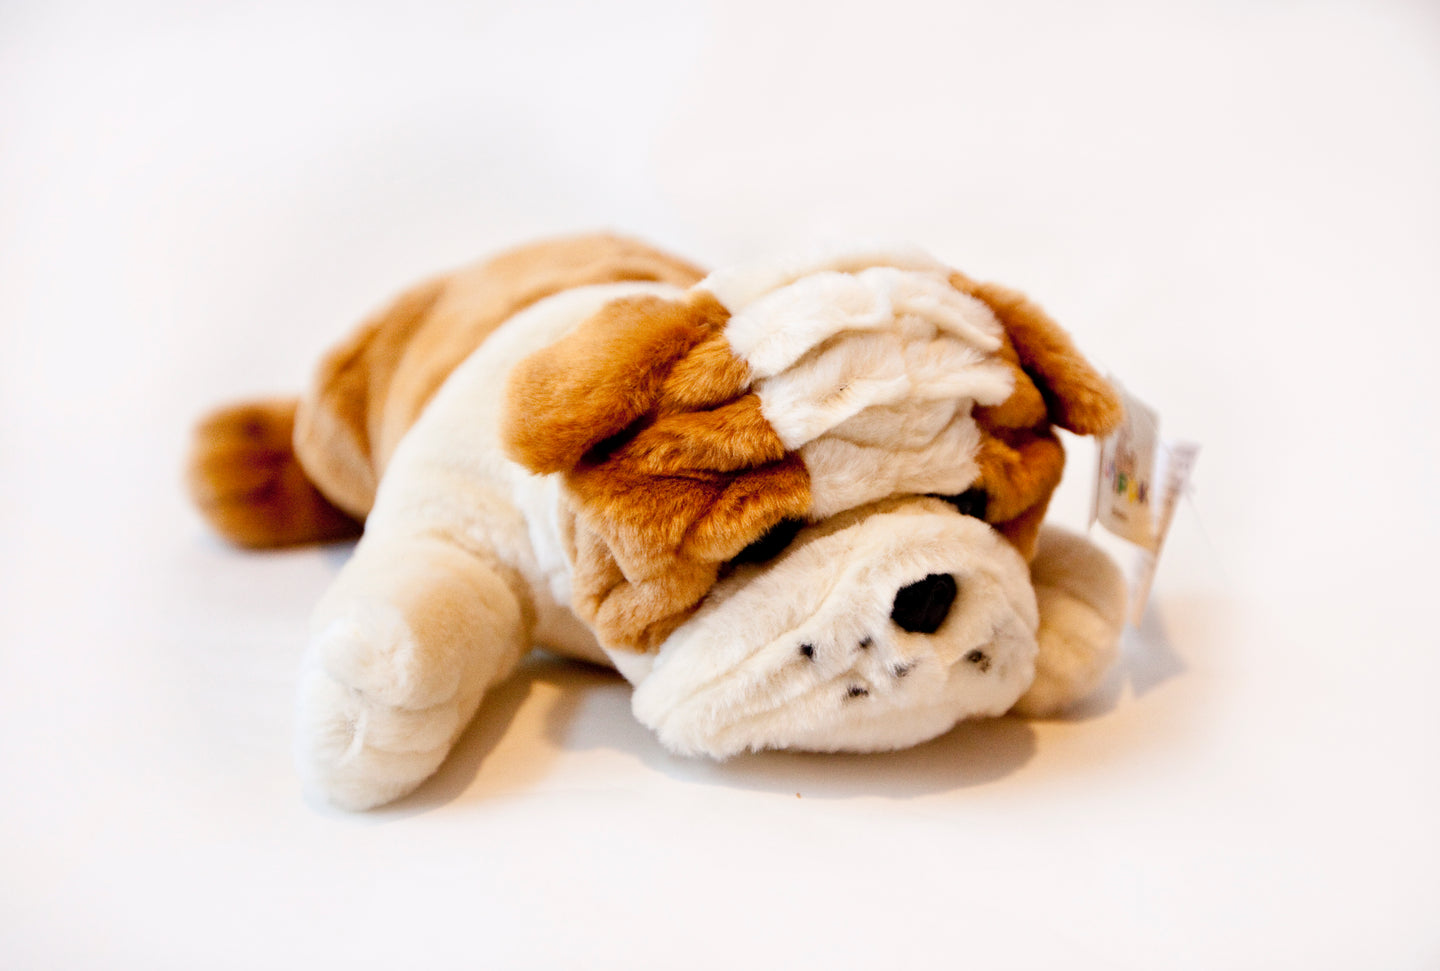 weighted stuffed dog